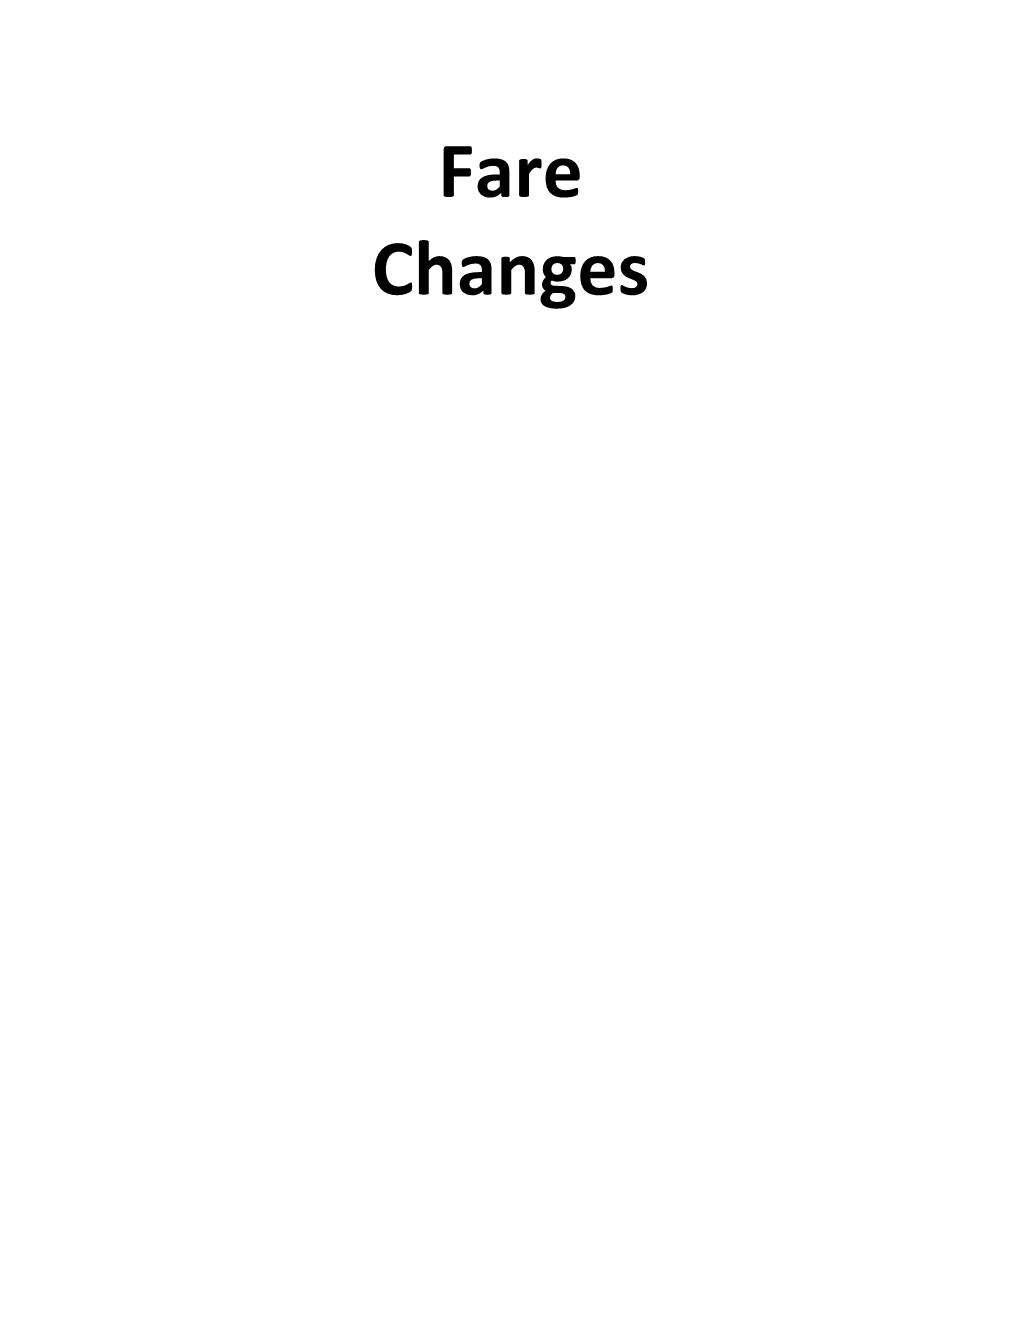 Fare Changes